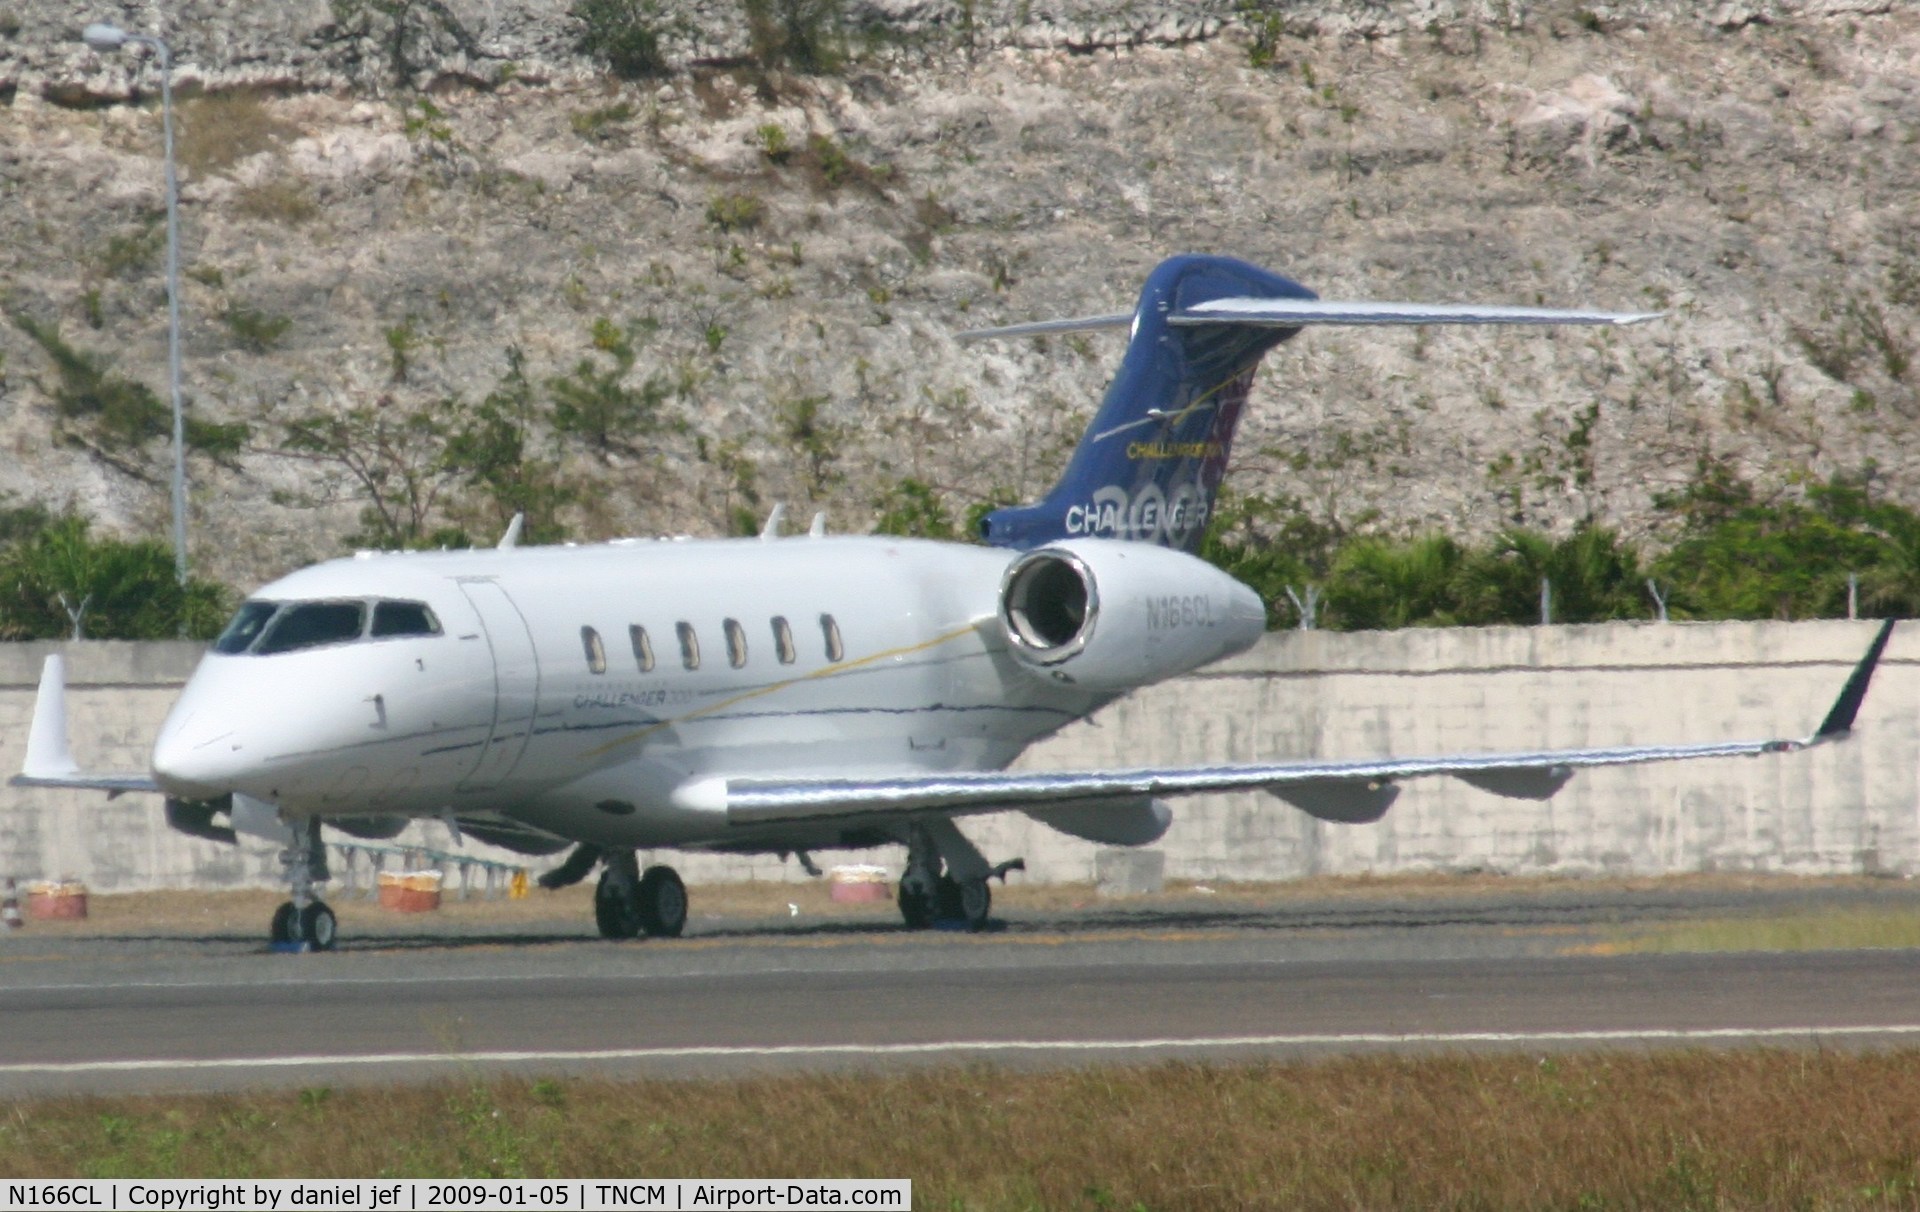 N166CL, 2007 Bombardier Challenger 300 (BD-100-1A10) C/N 20166, park at the cargo ramp